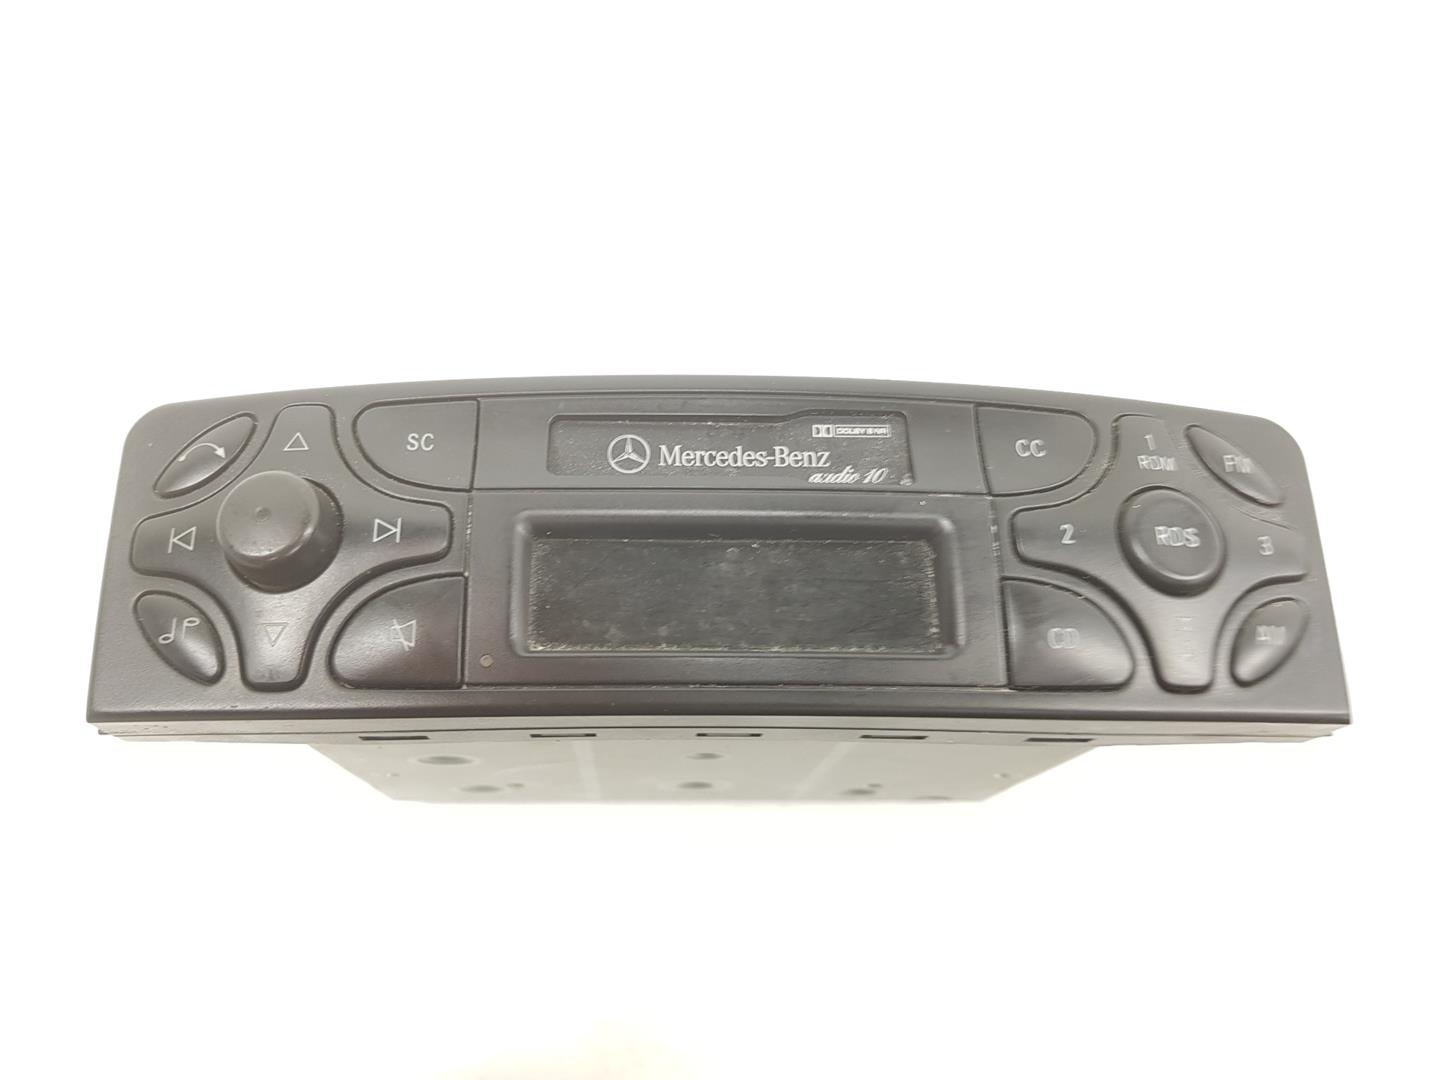 MERCEDES-BENZ C-Class W203/S203/CL203 (2000-2008) Music Player Without GPS A2038201686, A2038201686 19825993